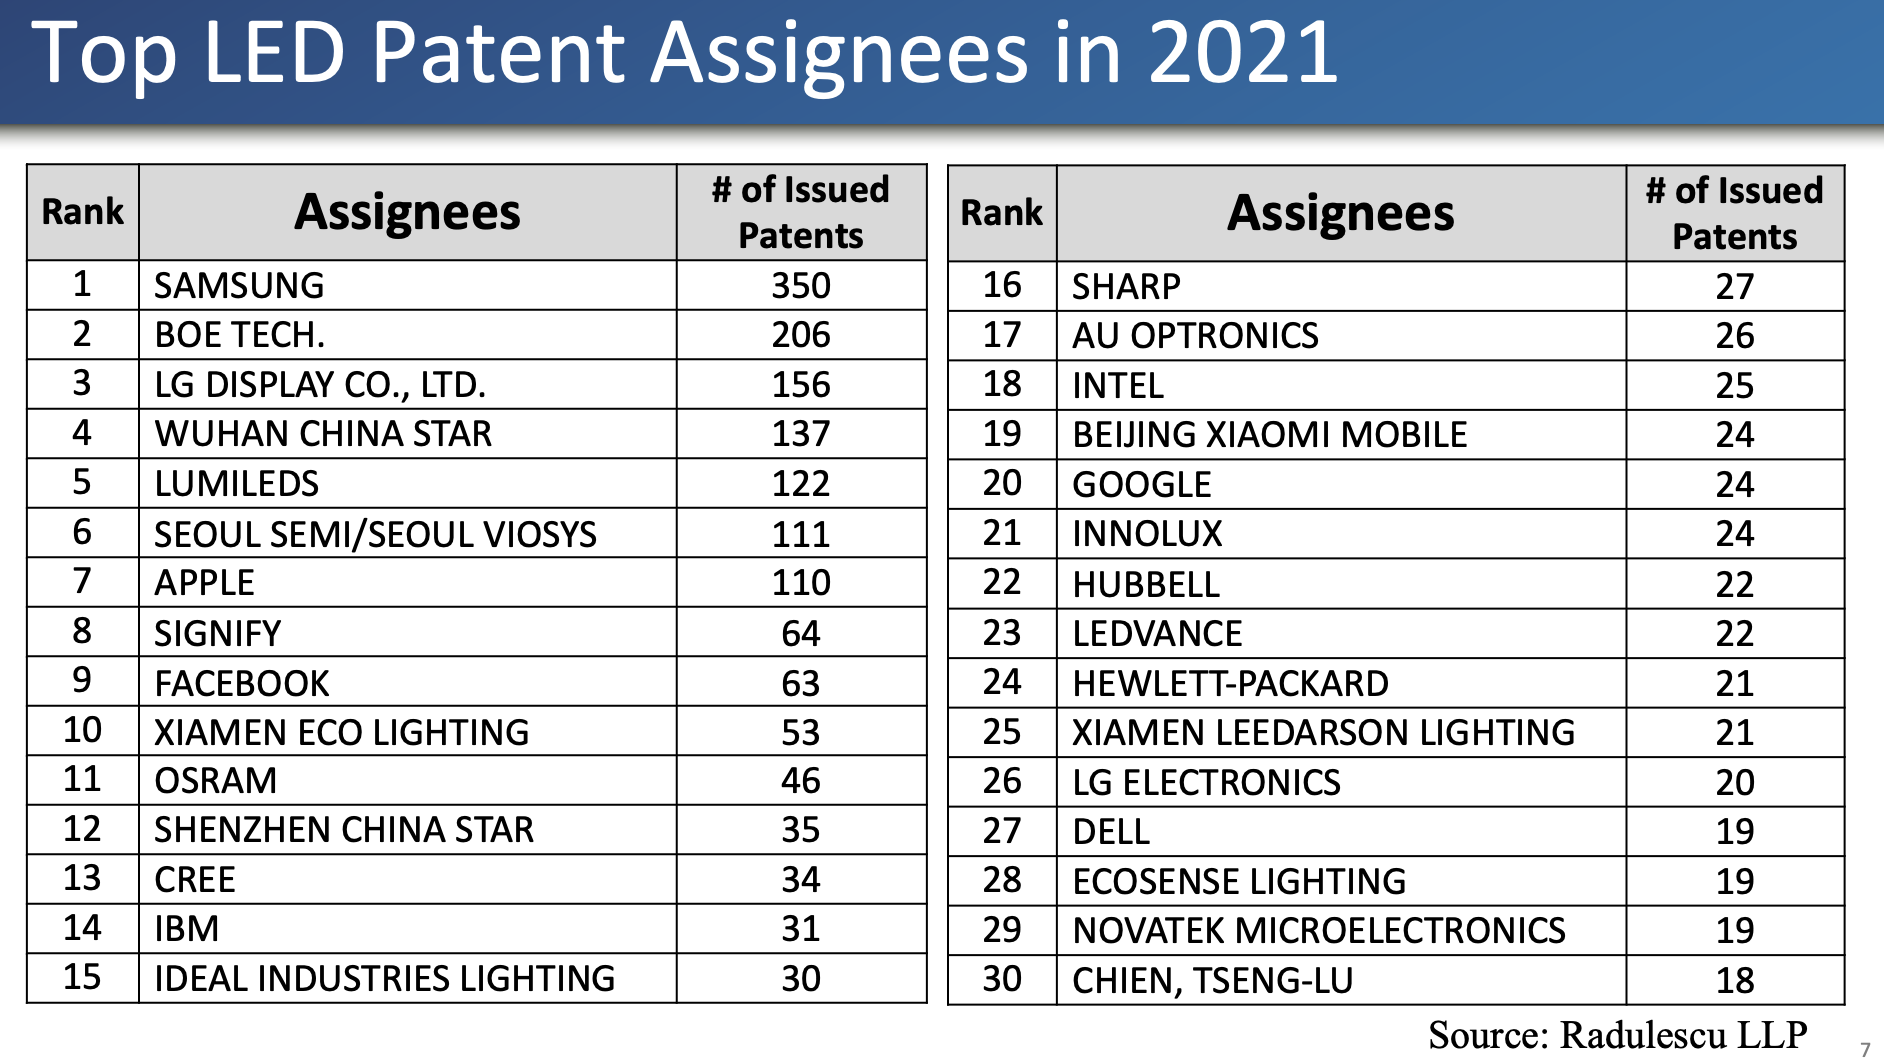 Top LED Patent Assignees in 2021